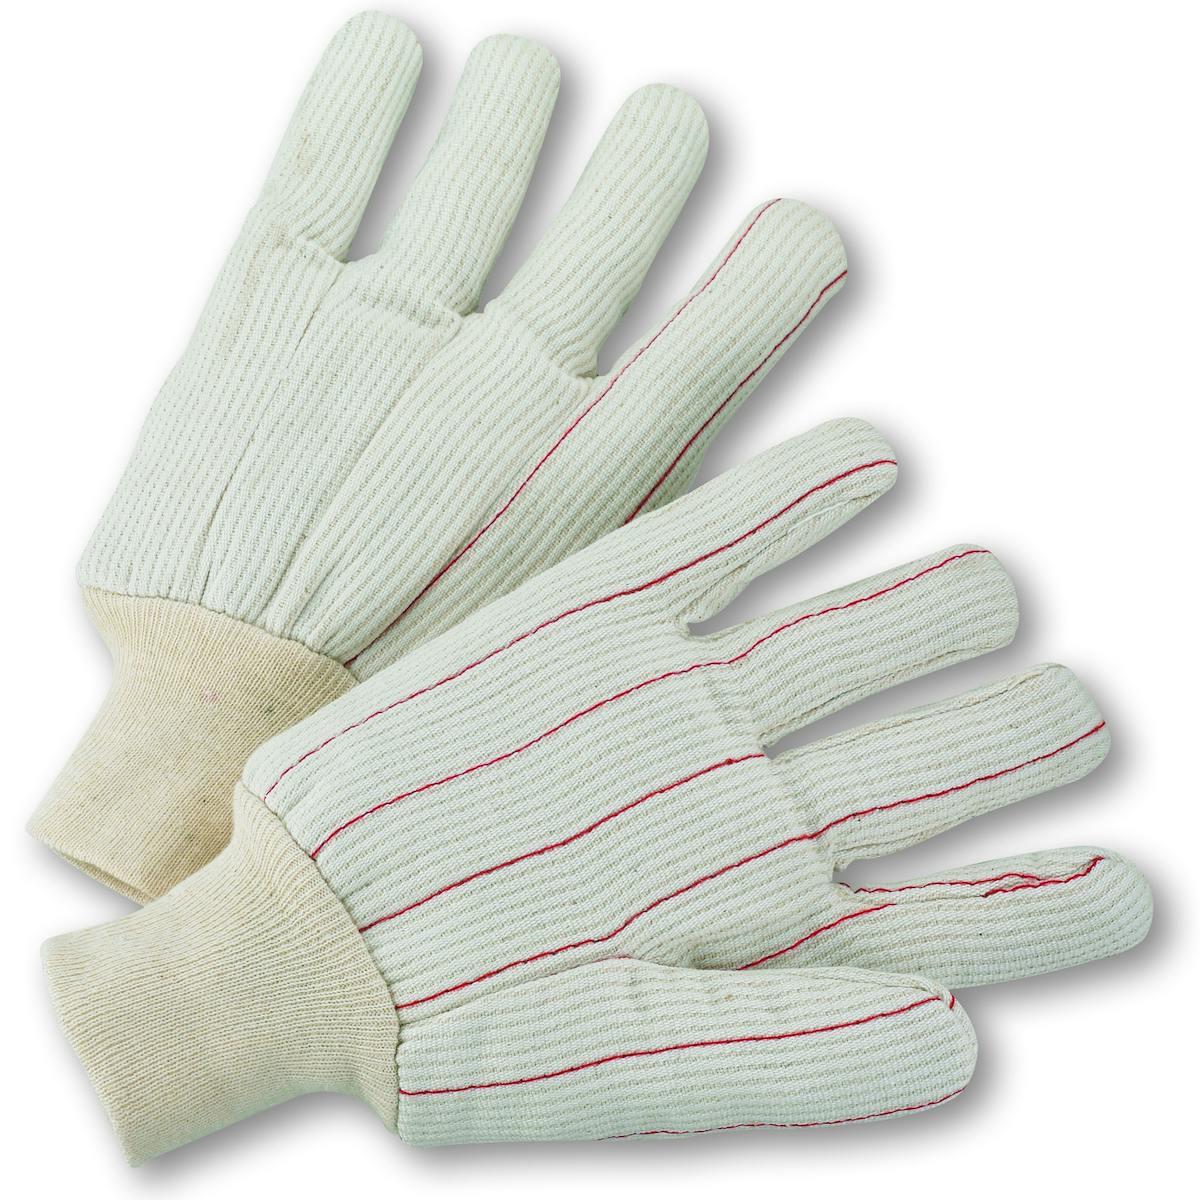 Polyester/Cotton Corded Double Palm Glove with Nap-In Finish - Natural Knit Wrist, Natural (K81SCNCI) - L